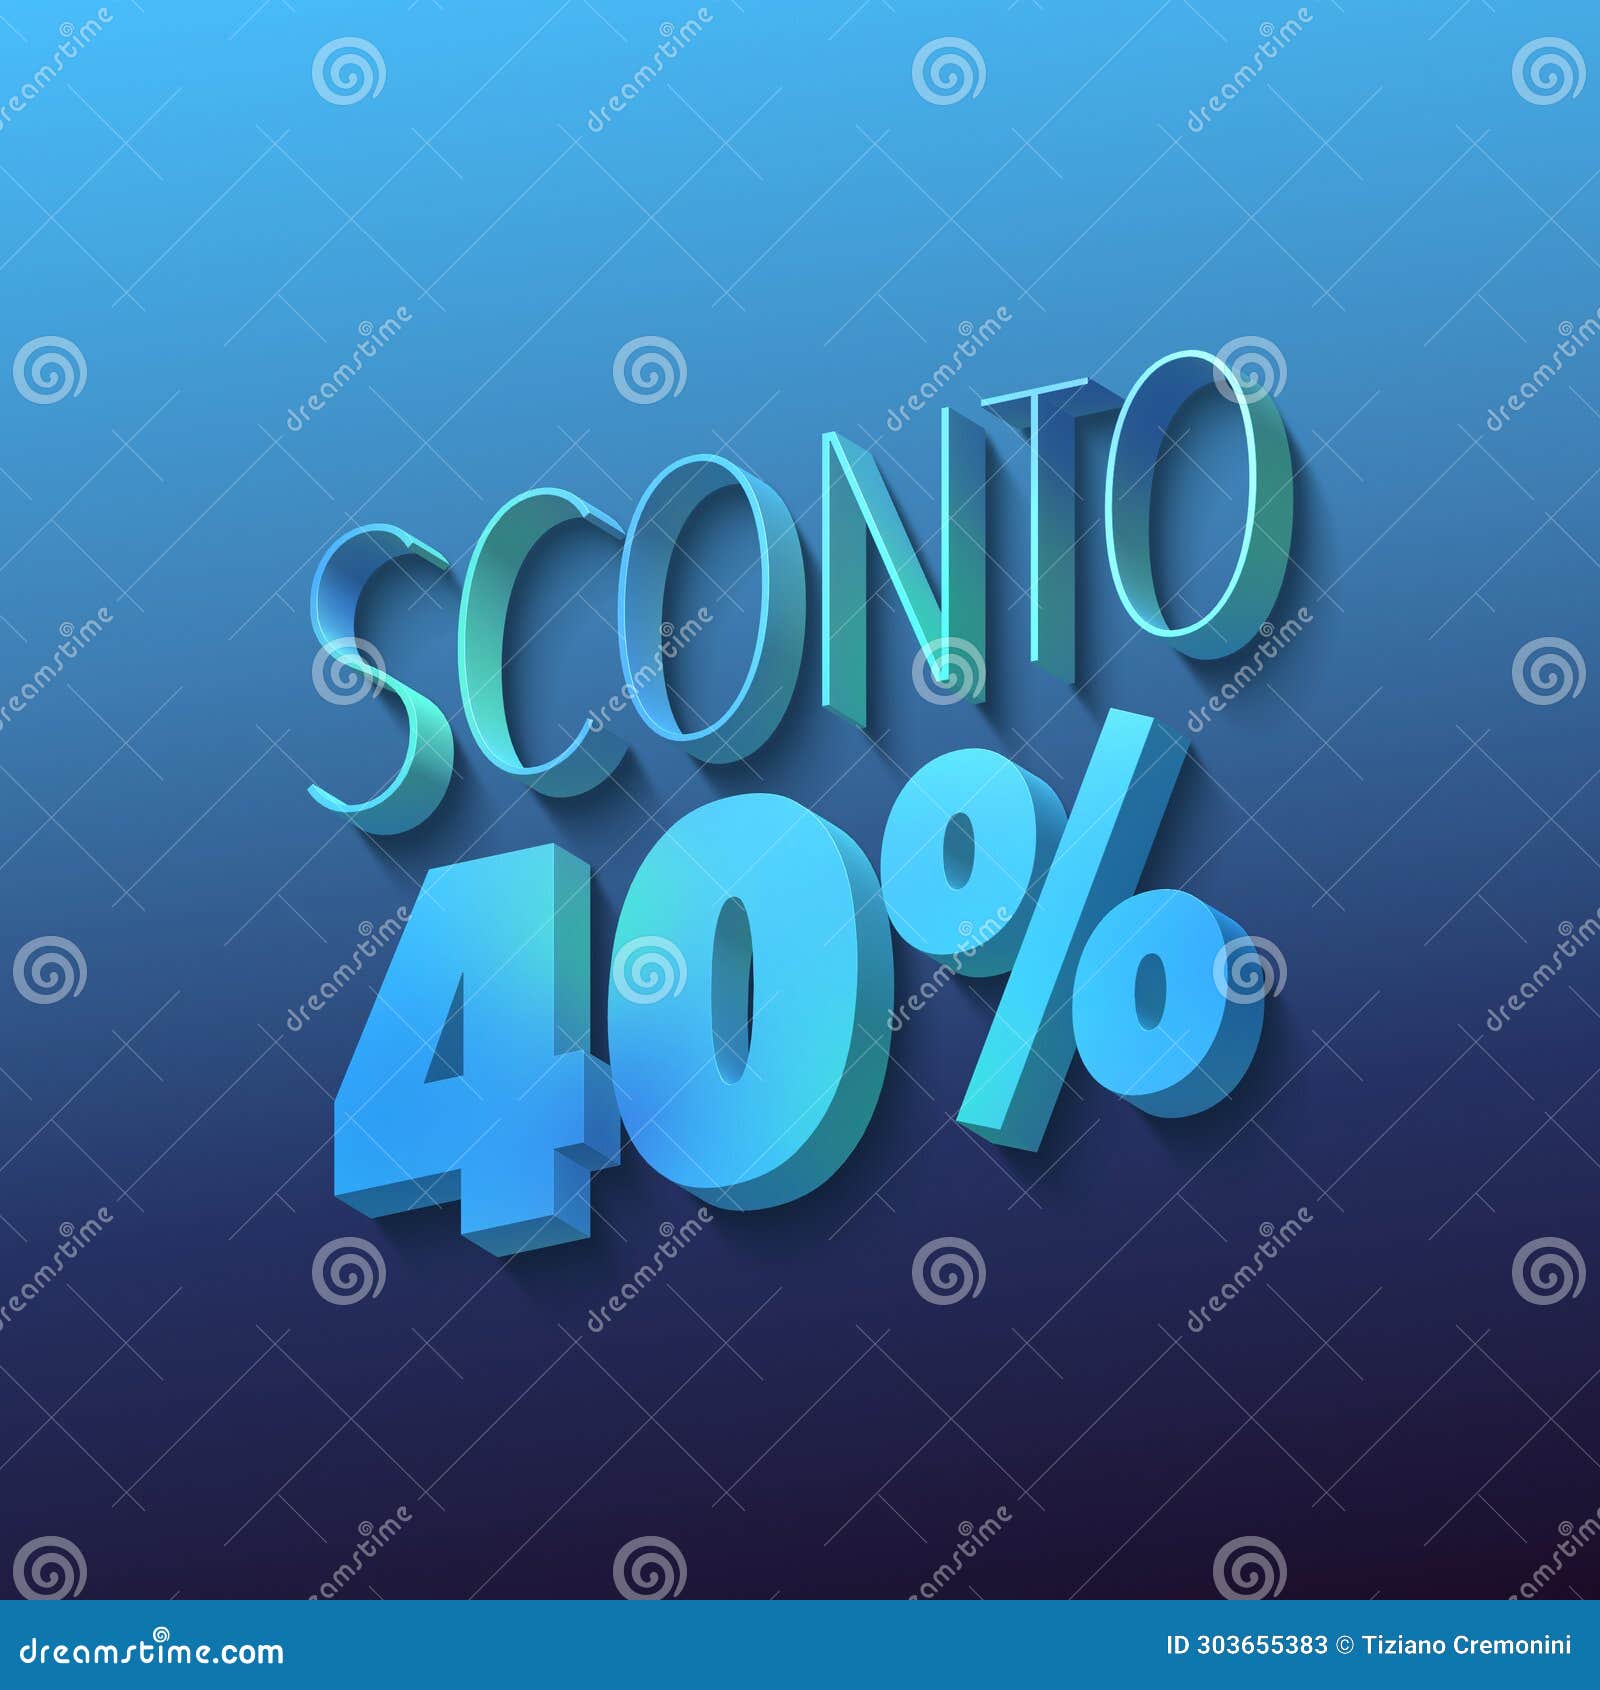 sconto 40%, italian words for 50 percent off, blue letters on blue background, 3d rendering